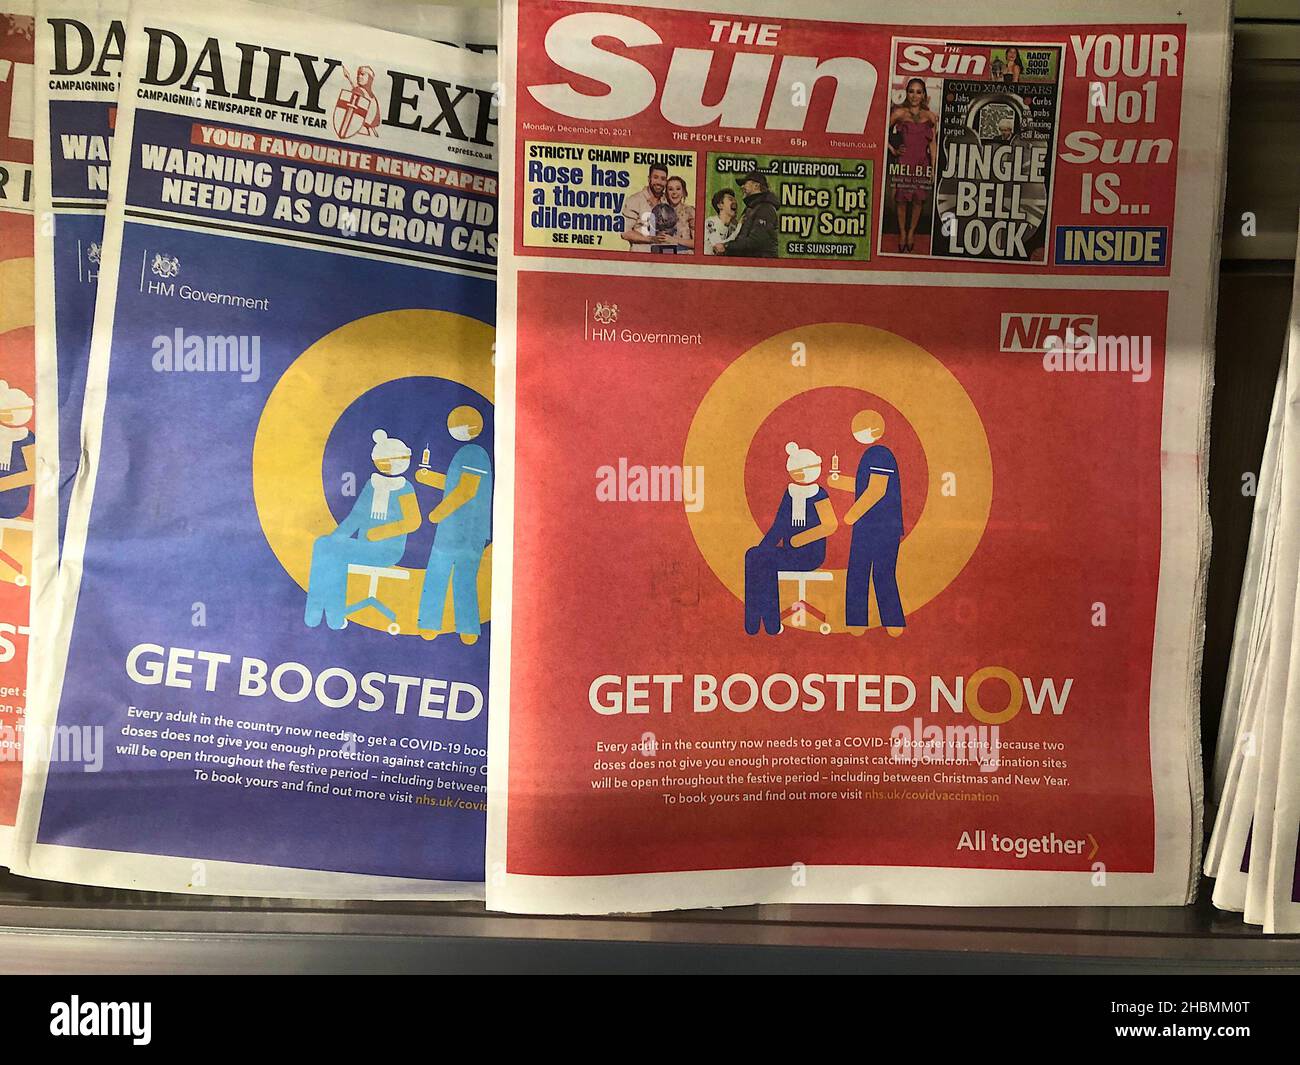 Ashford, Kent, UK. 20th Dec, 2021. Covid Booster campaign on the front page of all uk national newspapers on display. Get boosted now. Photo Credit: Paul Lawrenson /Alamy Live News Stock Photo